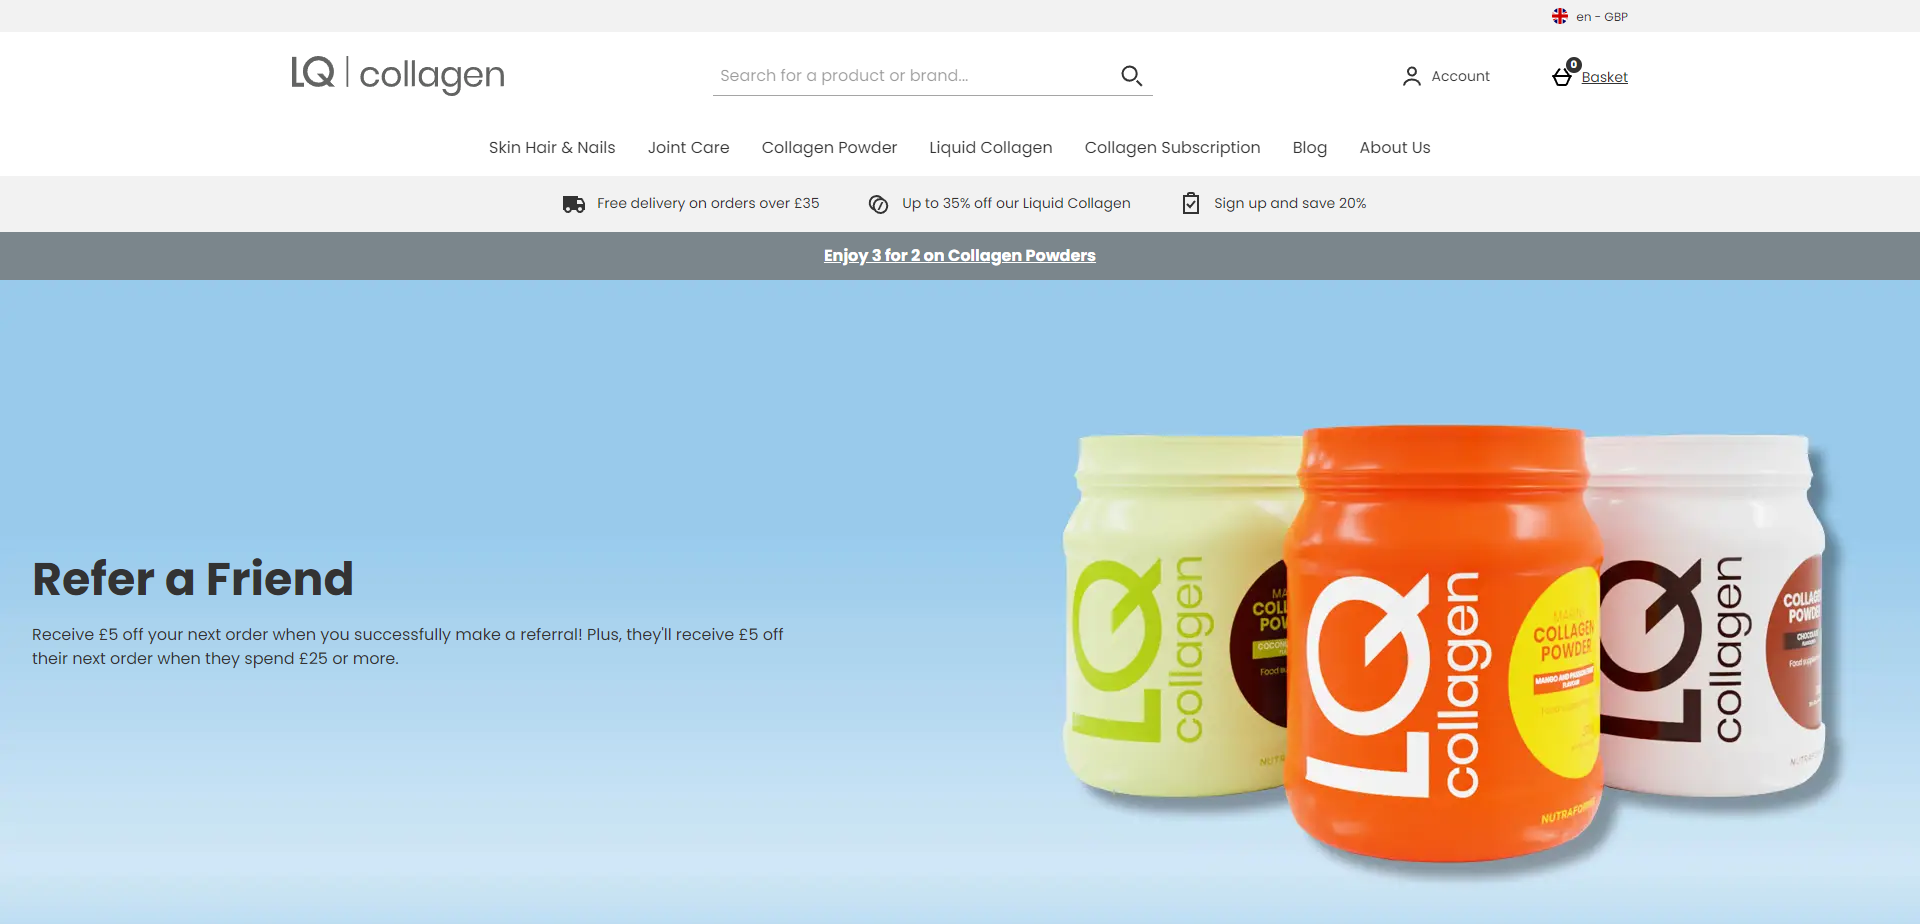 Landing Page for LQ Collagen